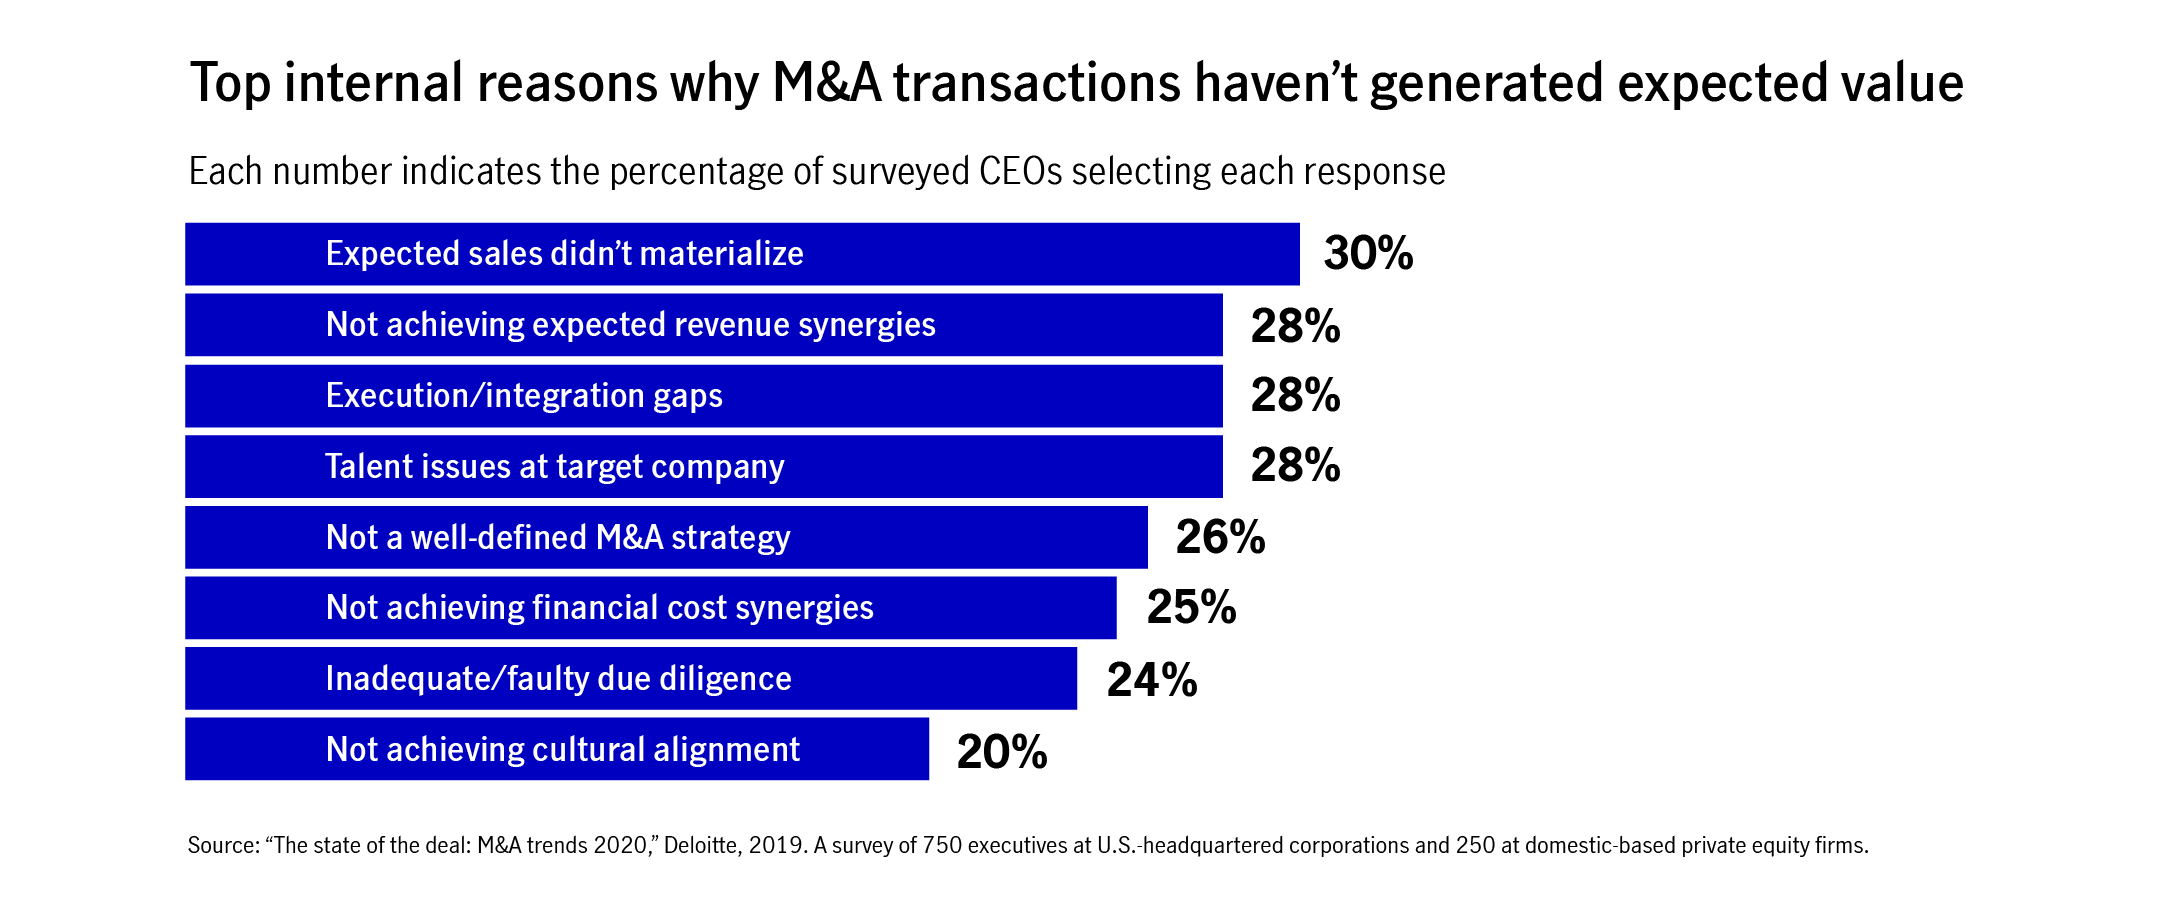 A bar chart showing top internal reasons why M&A transactions haven't generated expected value, in the opinion of CEOs who were involved in the corporate actions. Source is "The state of the deal: M&A trends" published by Deloitte in 2019, survey of 750 U.S.. executives and 250 domestic private equity firms.